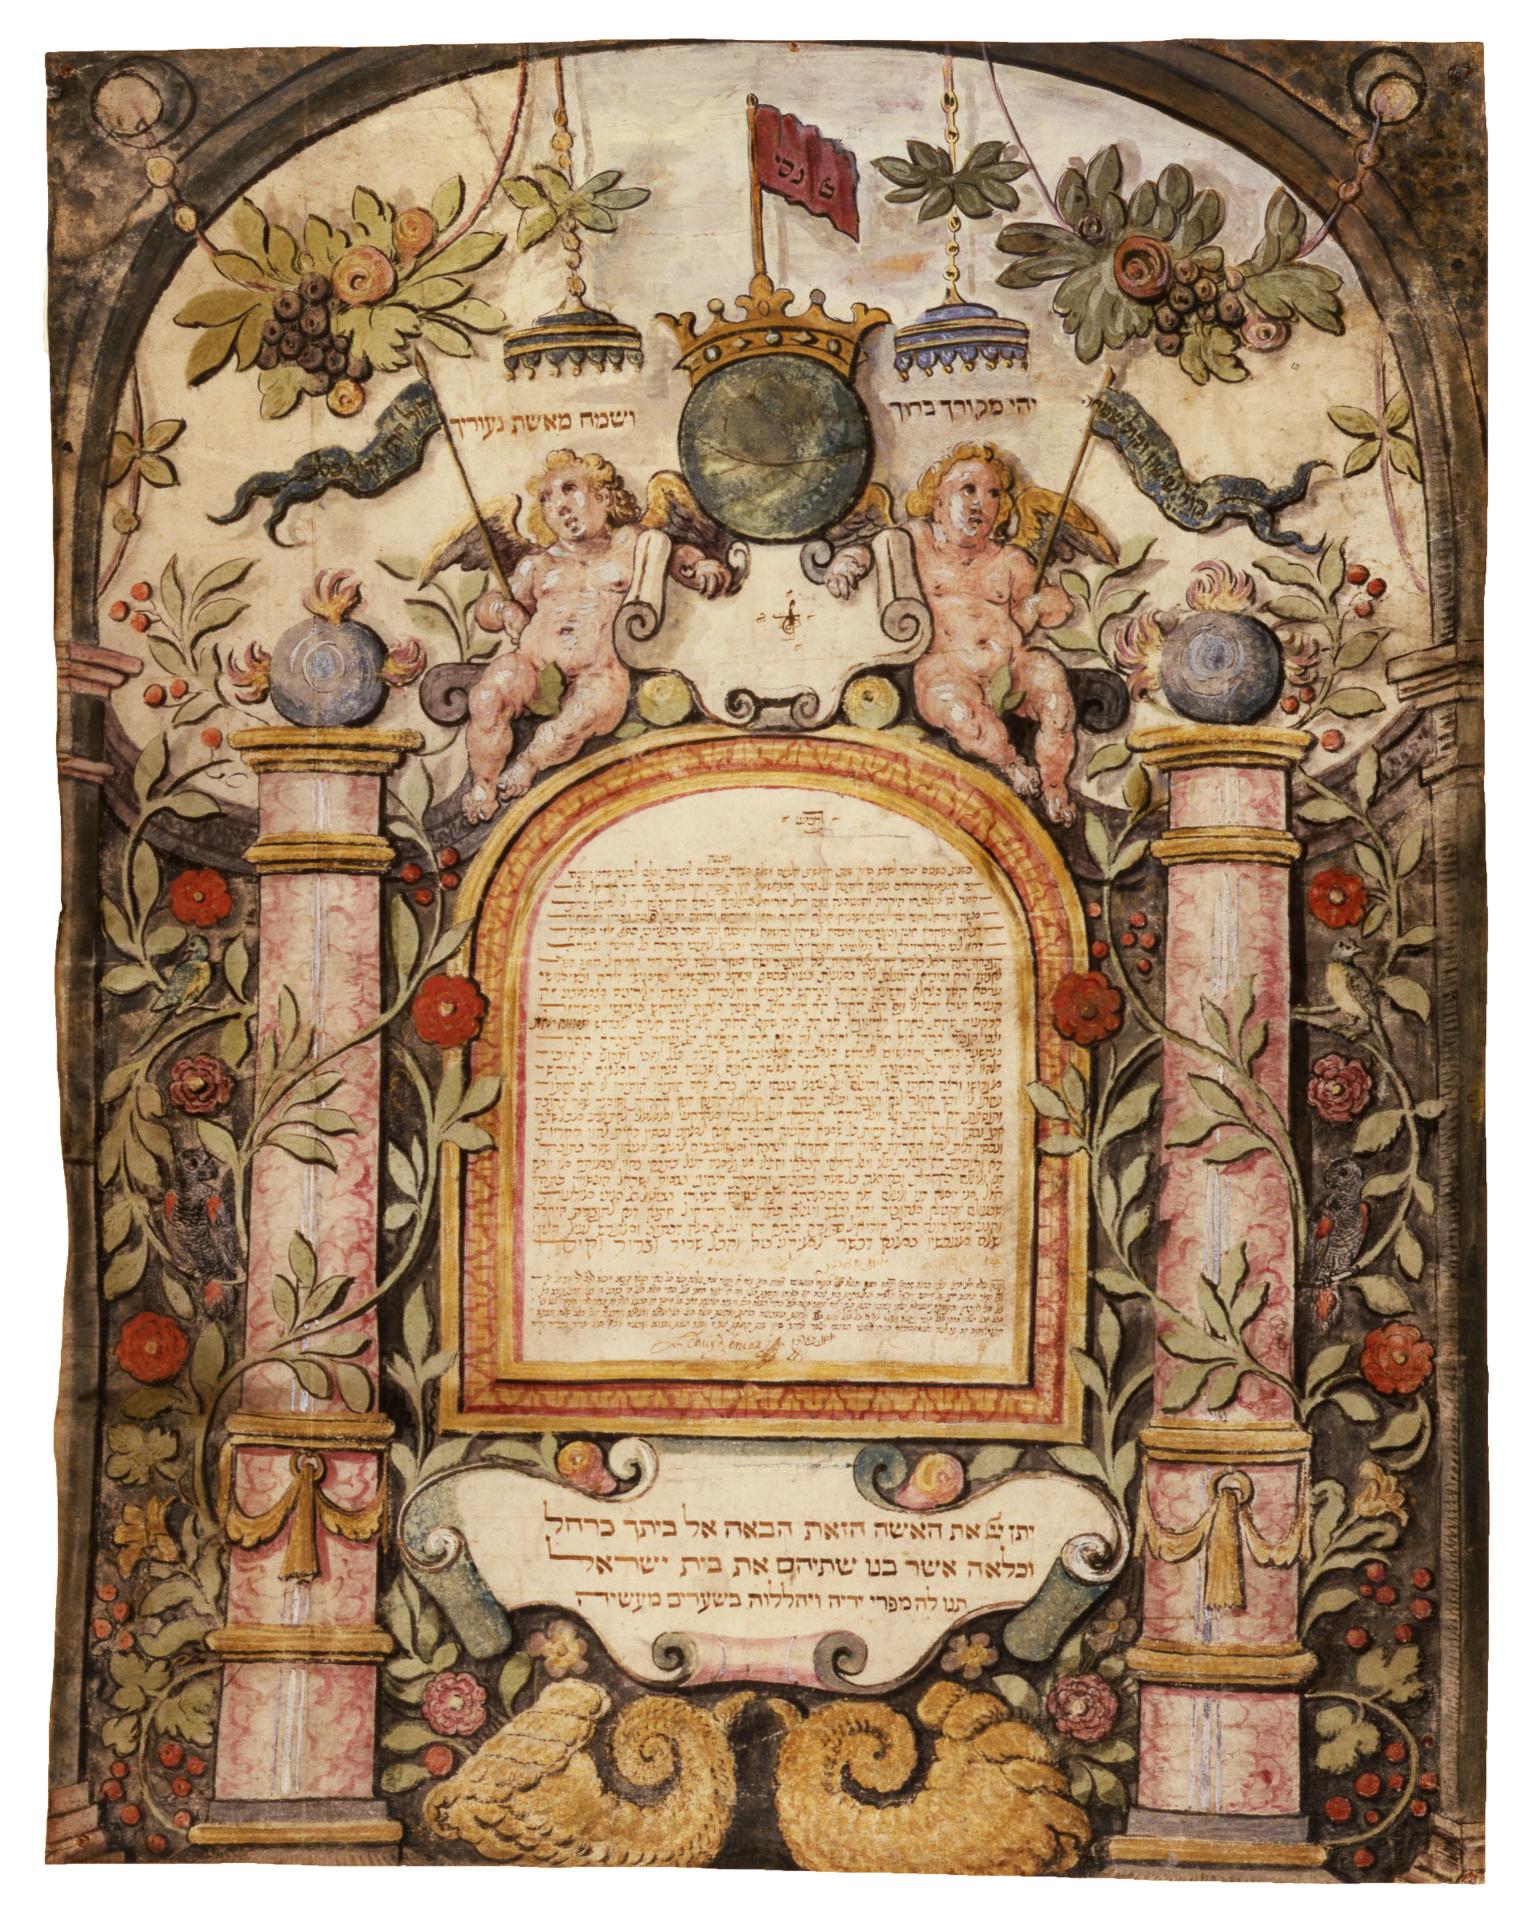 Page of Aramaic text decorated with cherubs atop a decorated archway with columns adorned with vines and flowers.